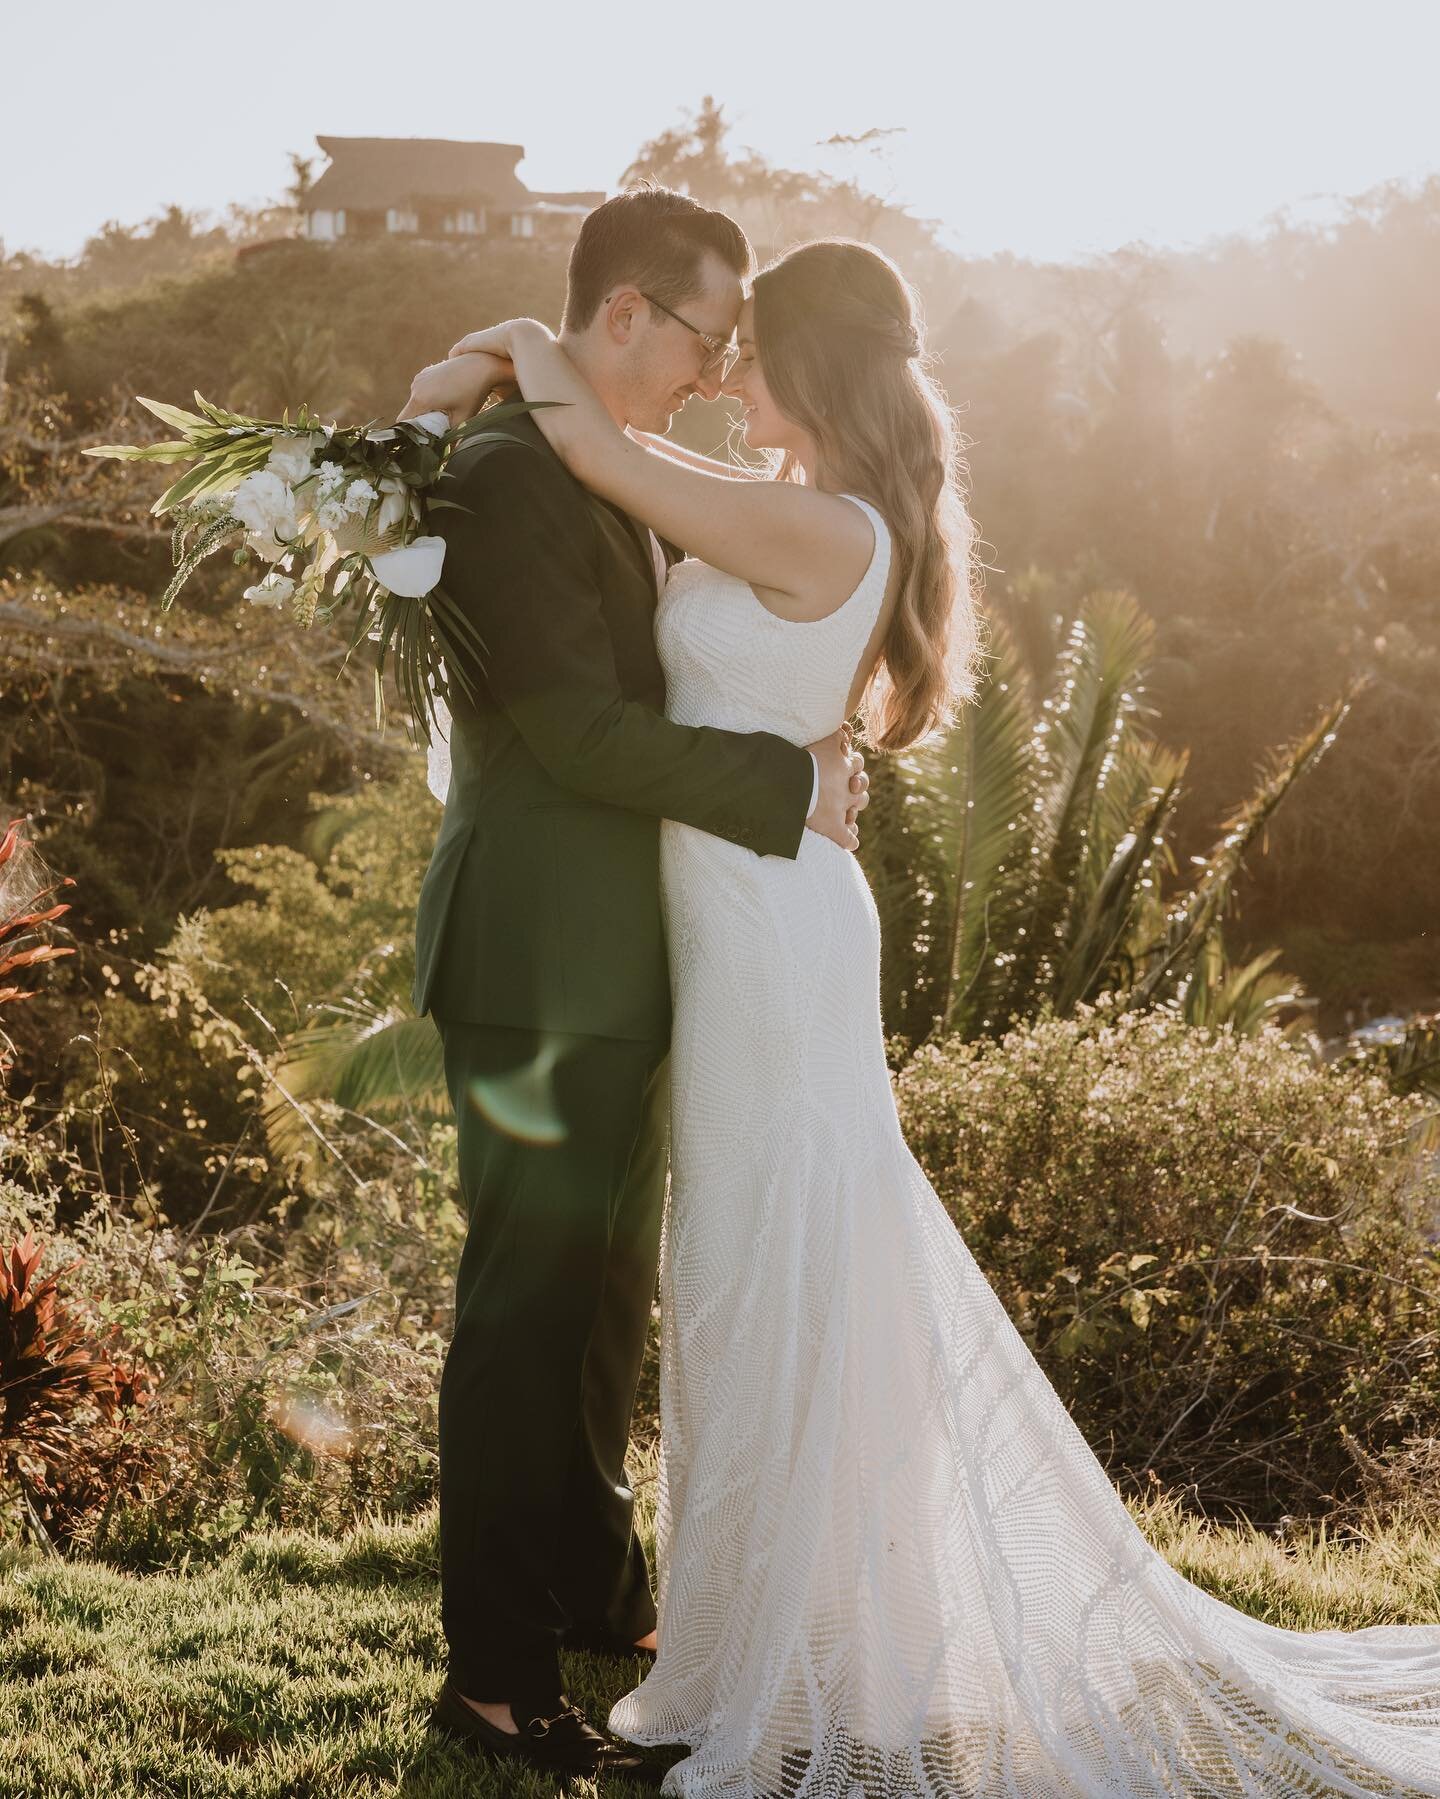 We are absolutely in love with this dreamy couple! It was so special to be a part of their big day. Marina, a total beauty inside and out and her dress was just so stunning. 💛

.

Photographer: @fulleredgestudio
Planner: @sunset-soiree
Florals: @flo